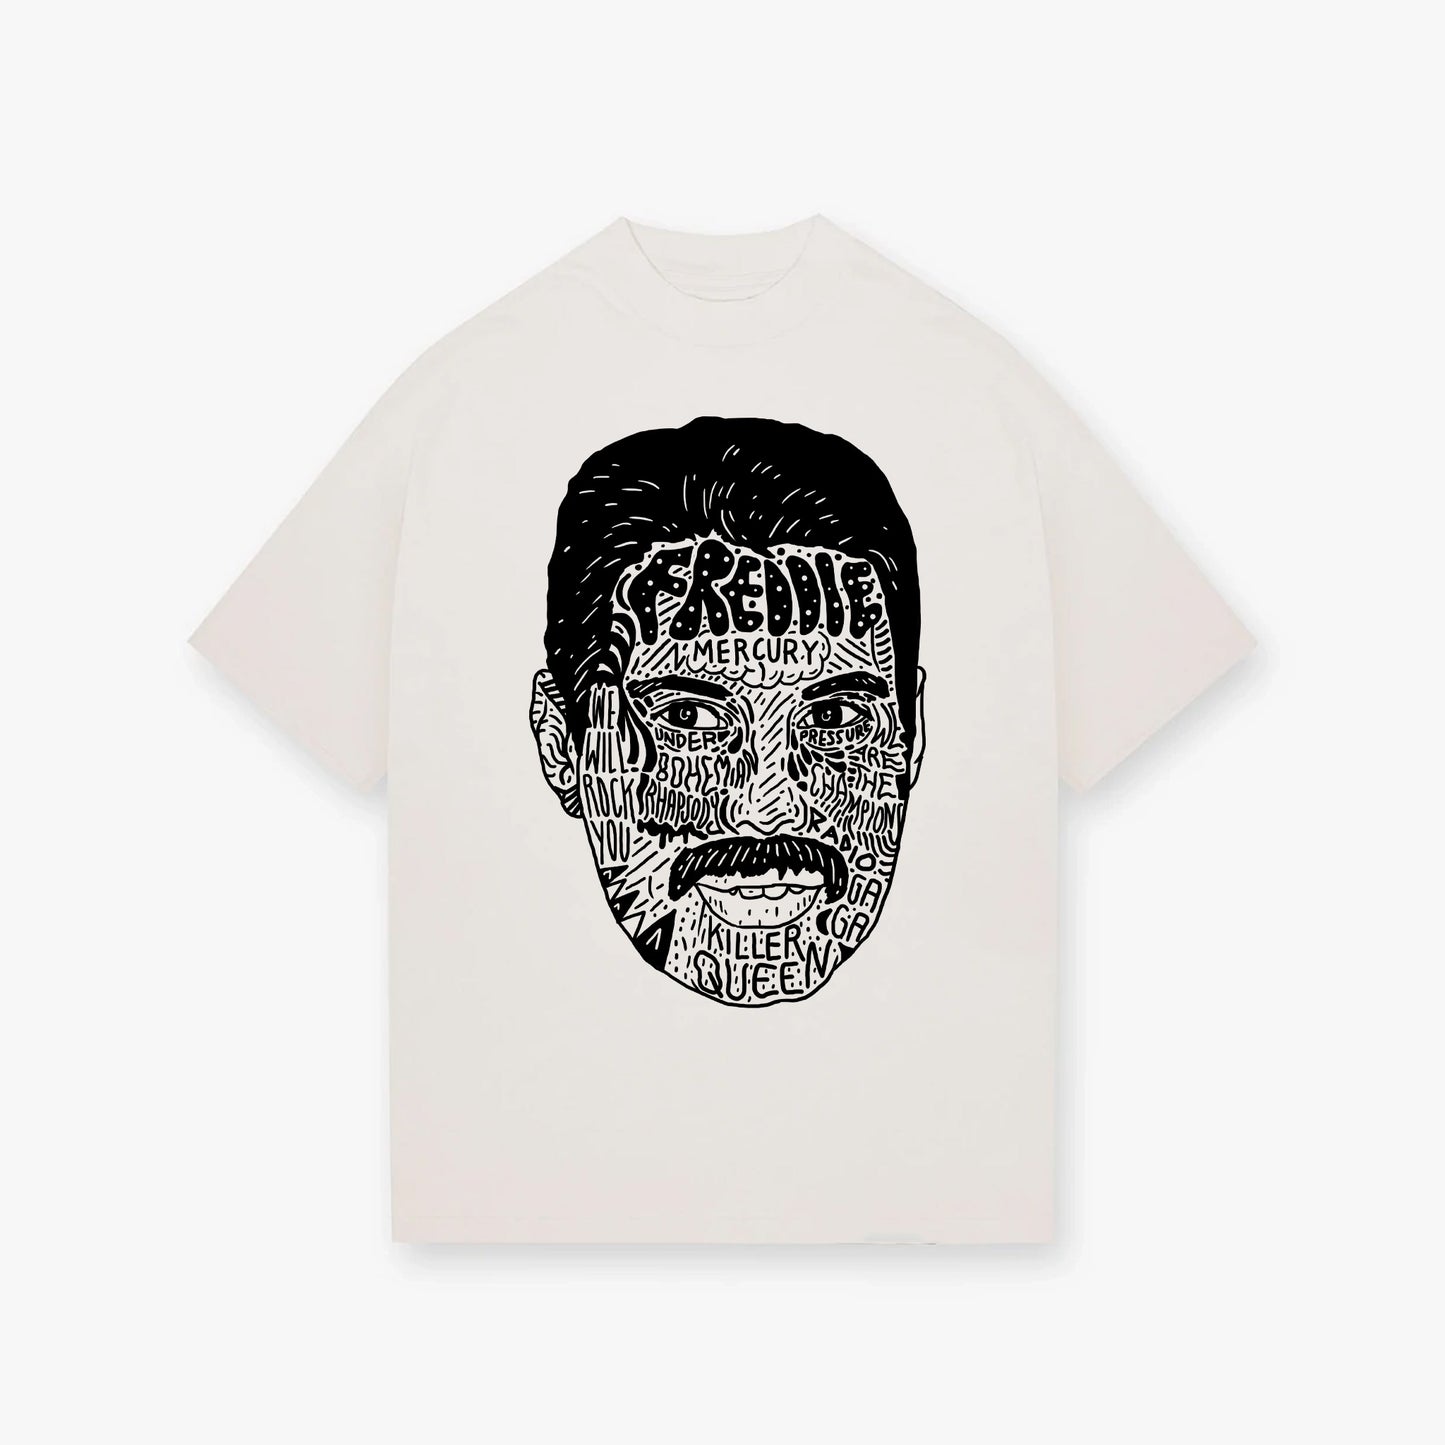 Freddie white Culture oversized T-shirt